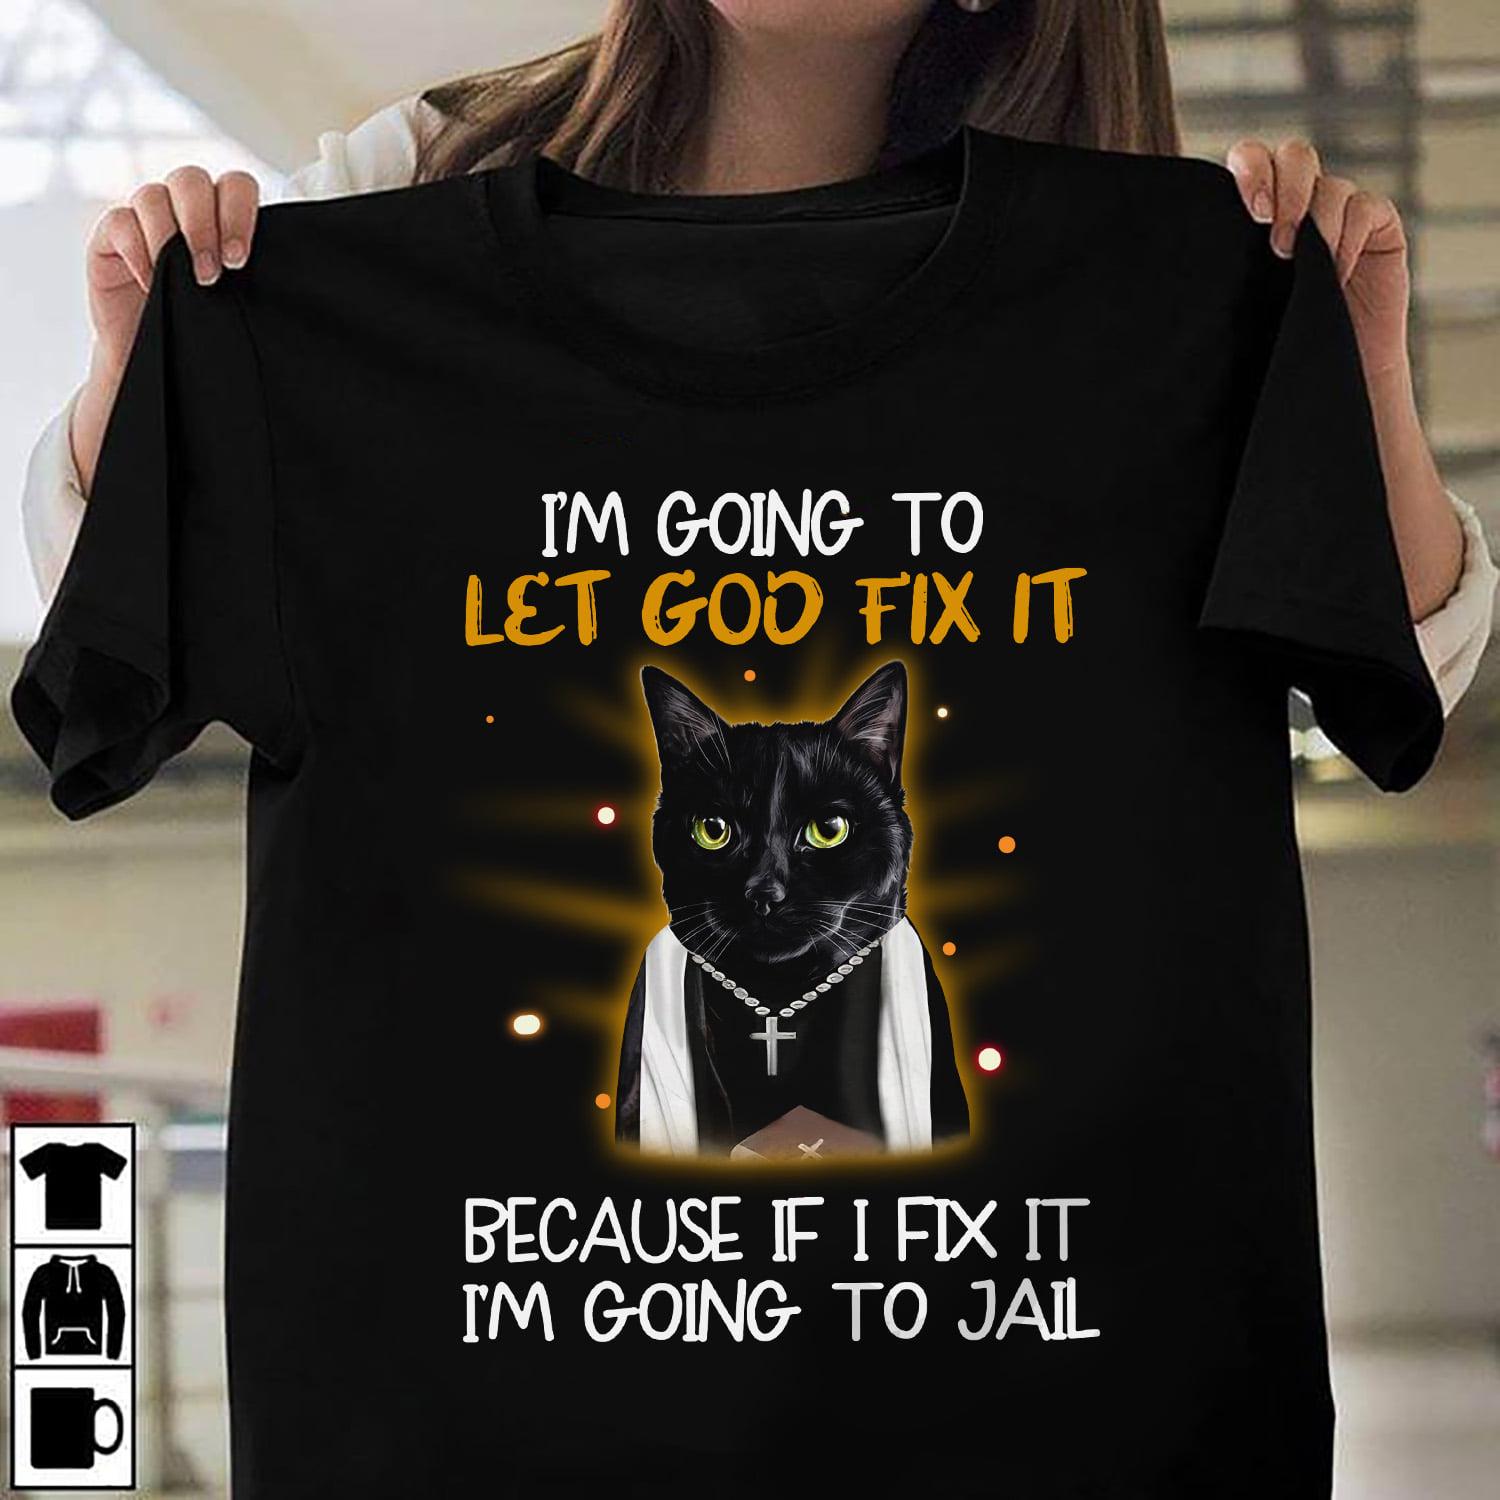 Cat Pastor - I'm going to let god fix it because if i fix it i'm going to jail